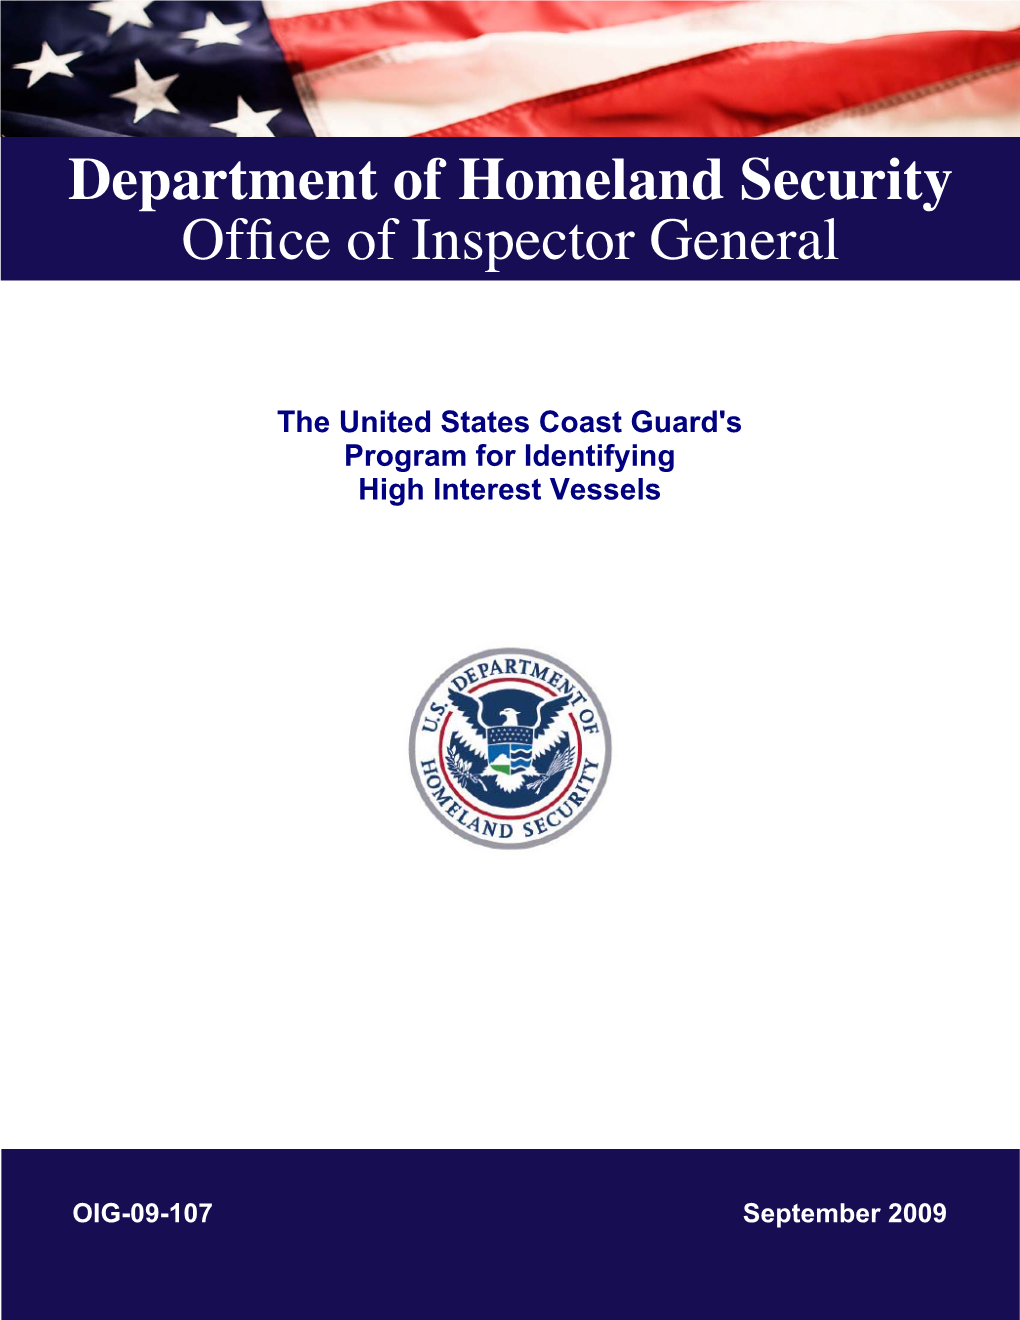 The United States Coast Guard's Program for Identifying High Interest Vessels